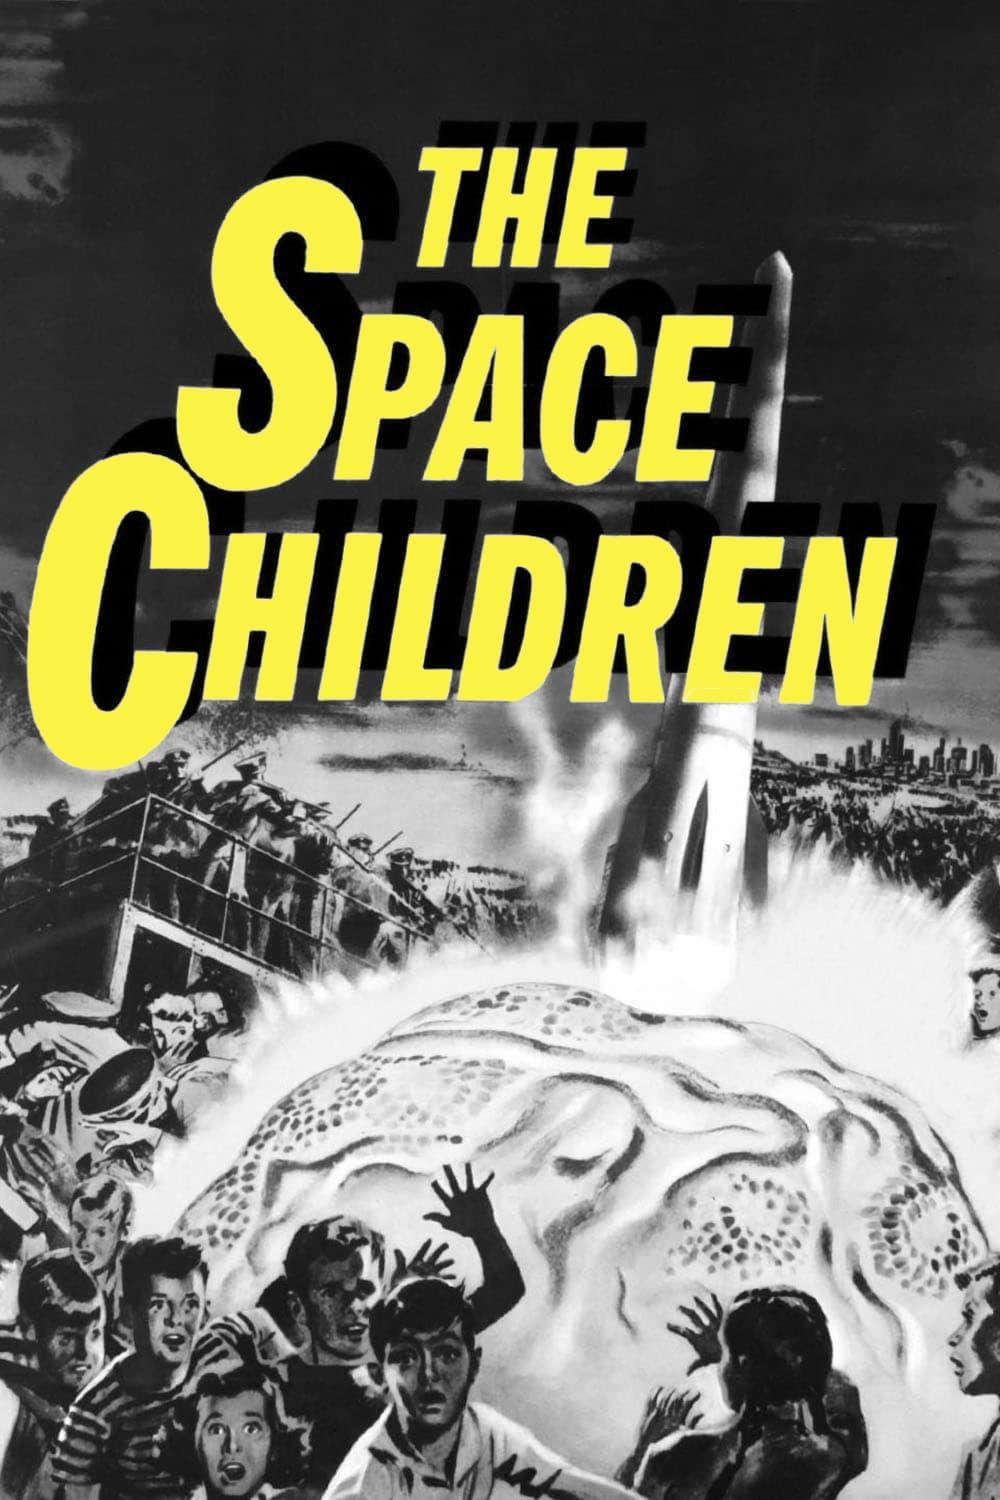 The Space Children poster